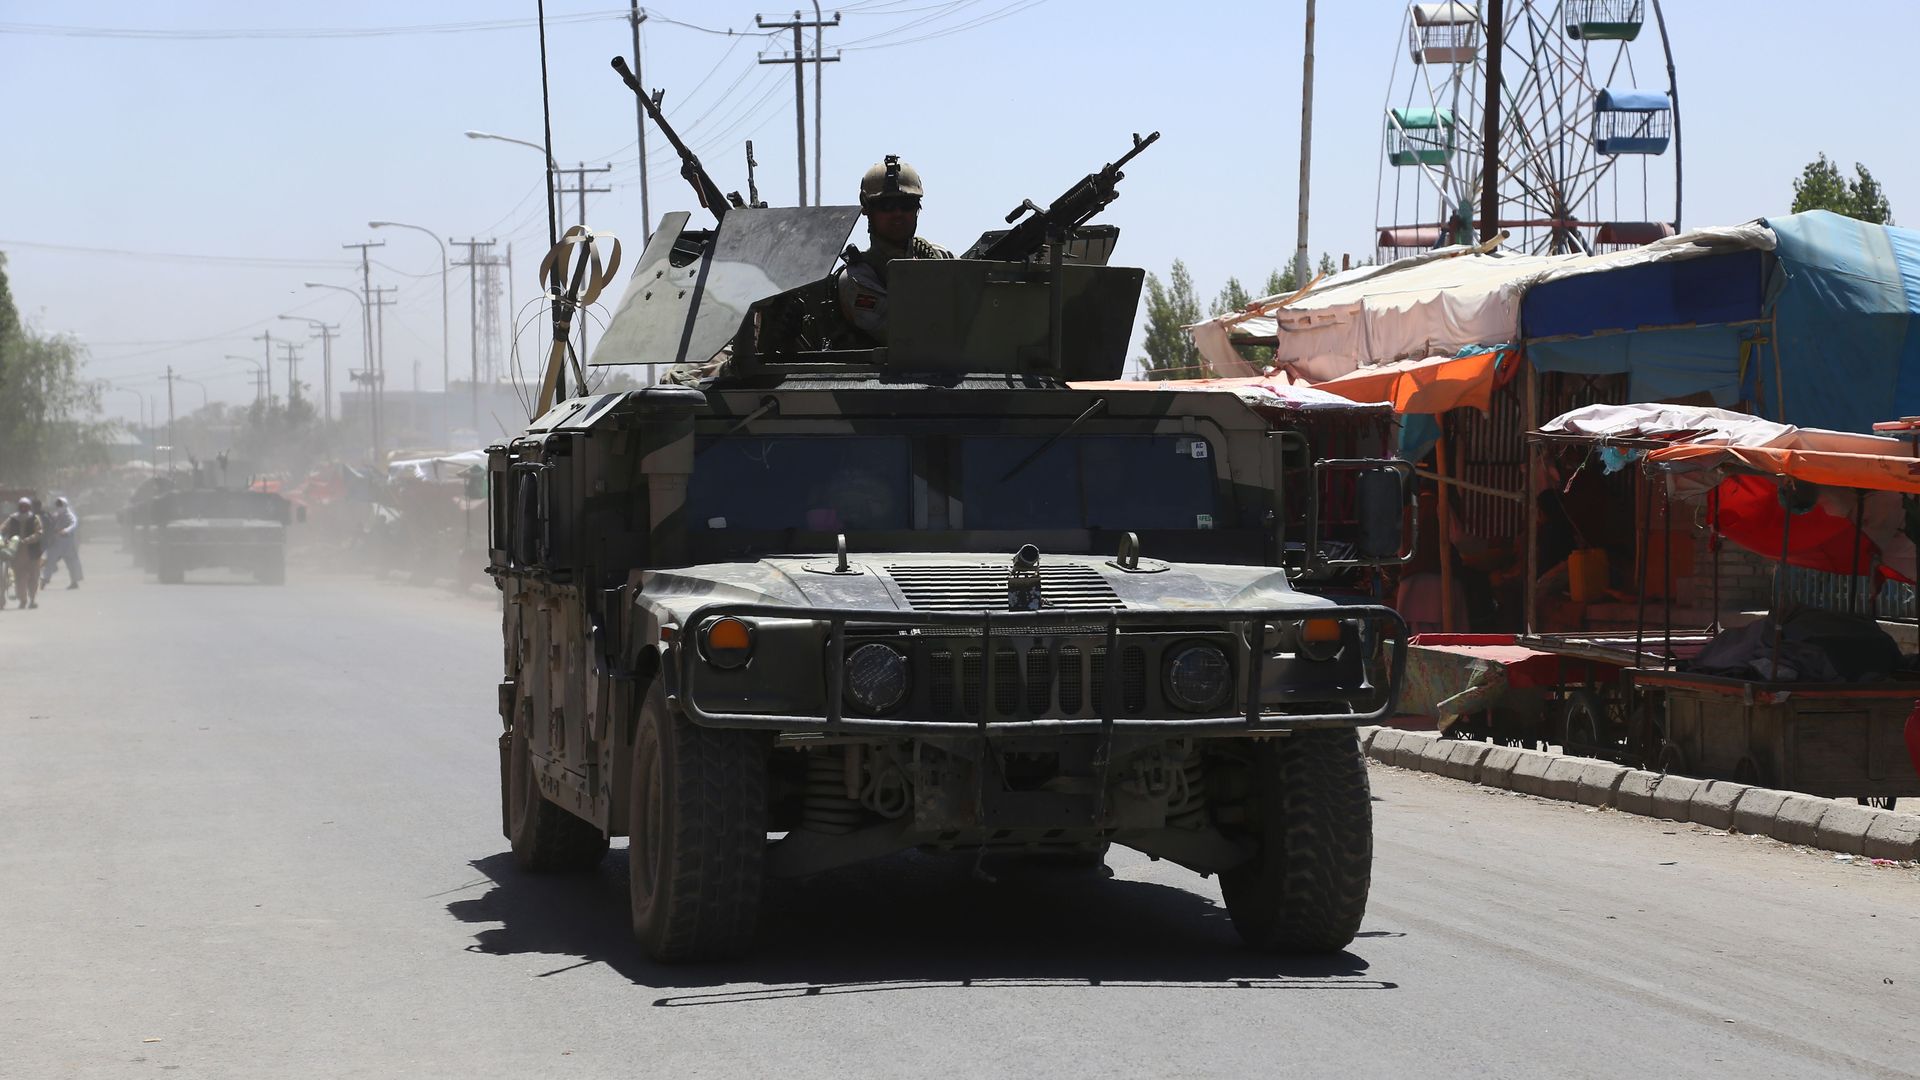 Afghan security forces drive in a tank.